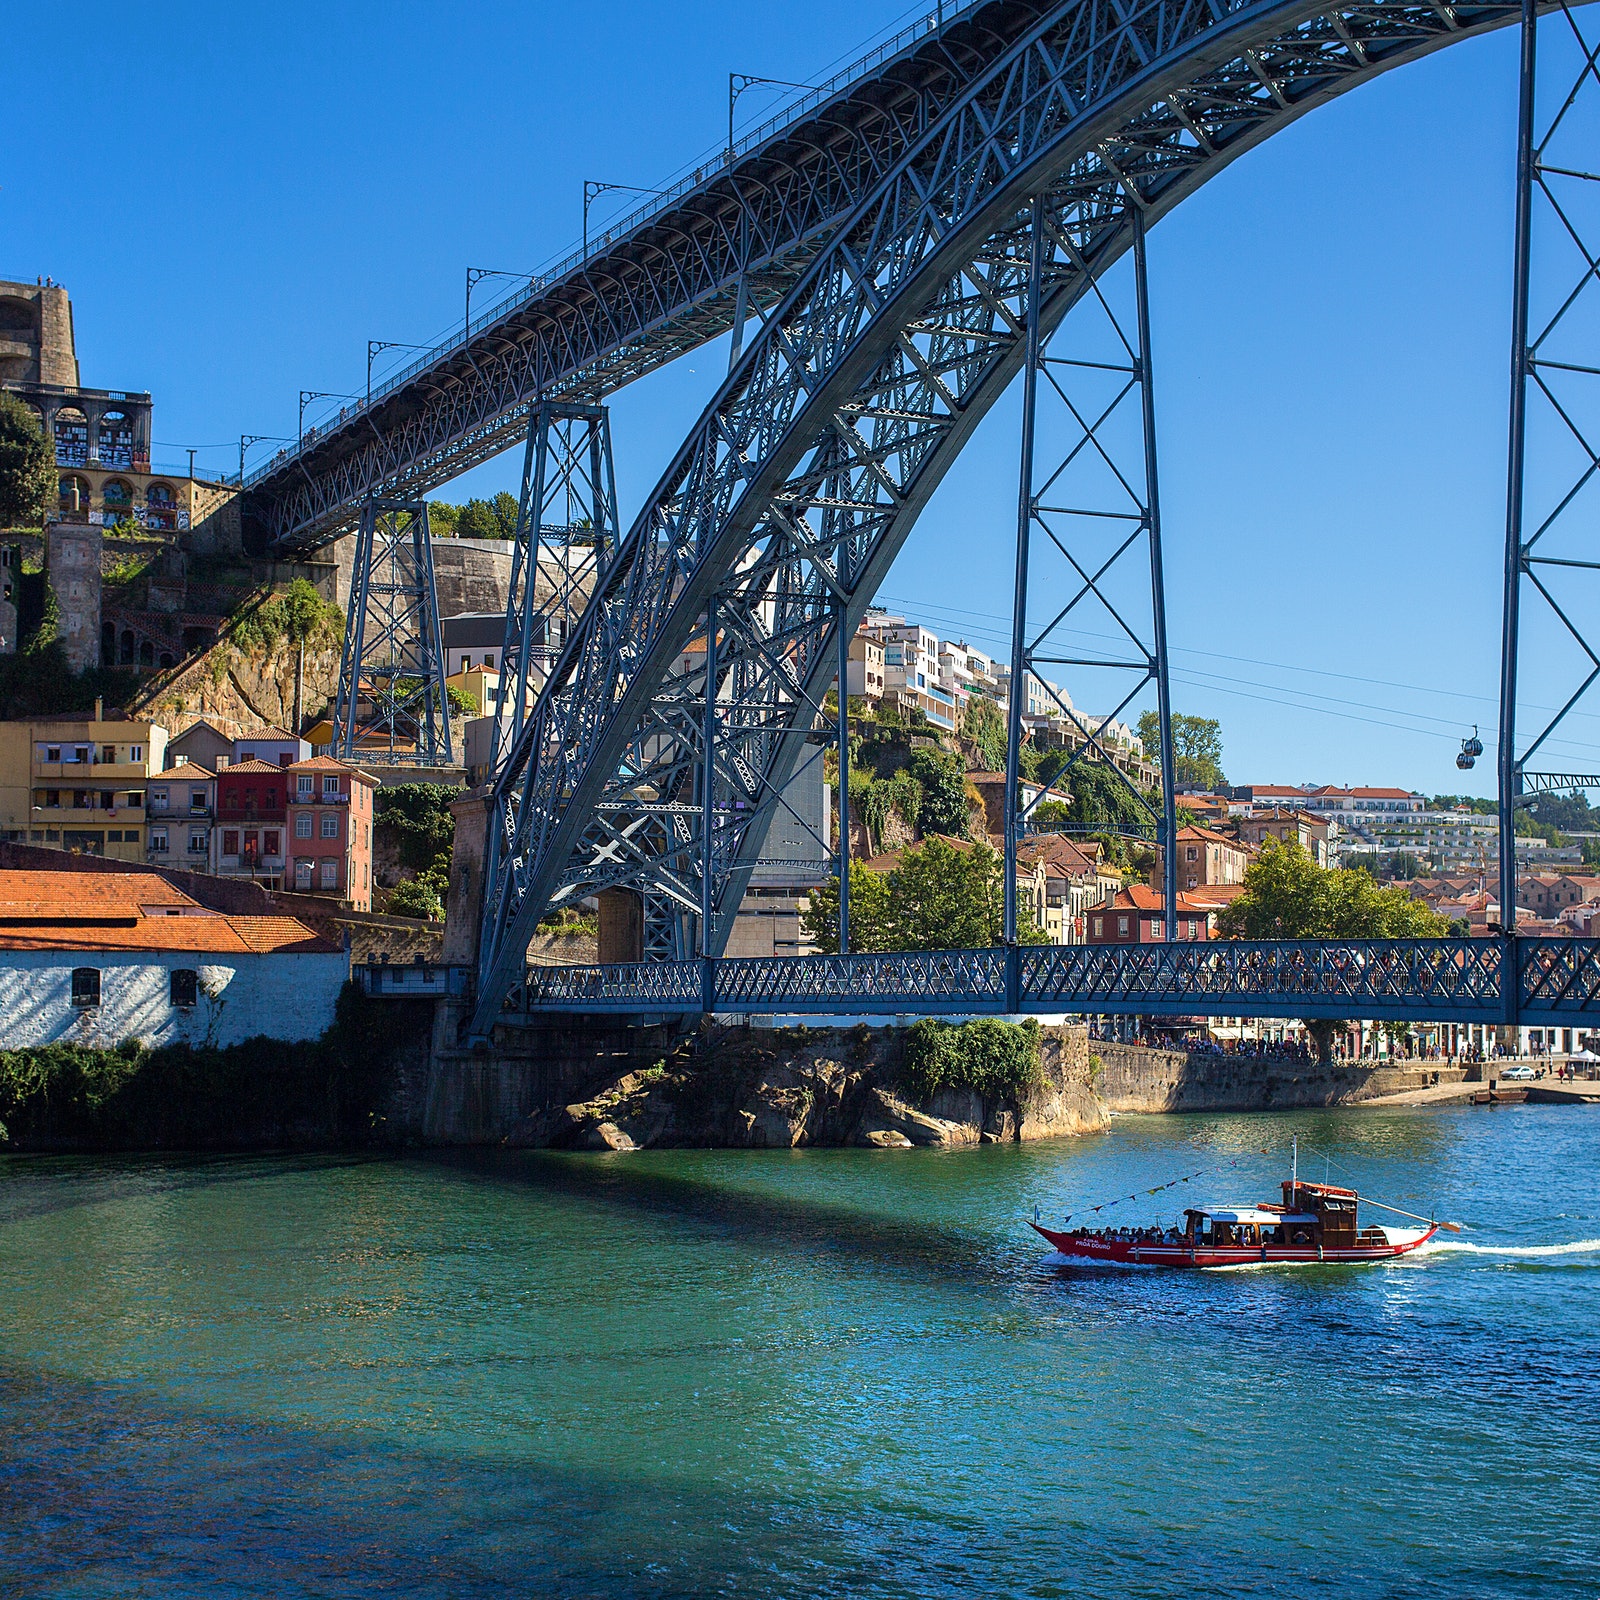 Hop-on Hop-off Bus + River Cruise Porto in Portugal